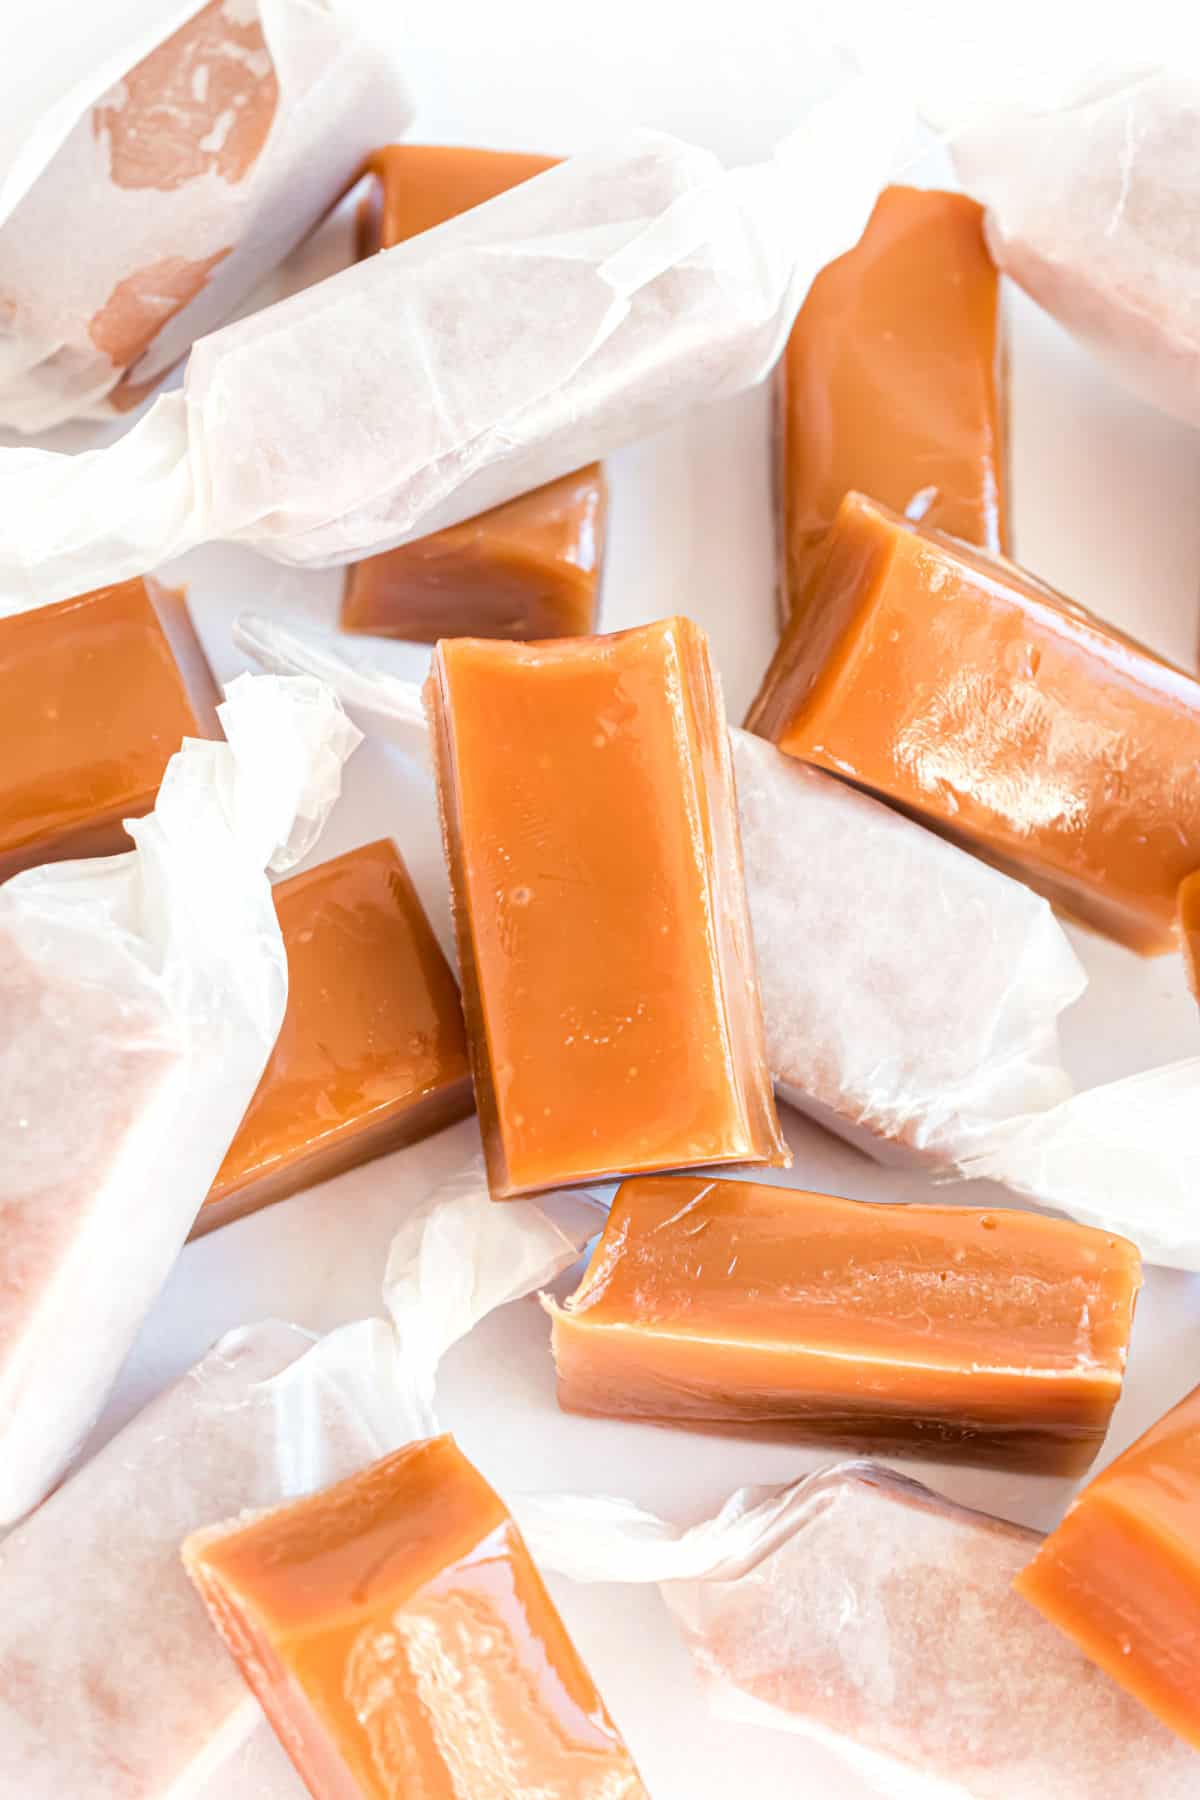 Homemade caramels wrapped in pieces of parchment paper.